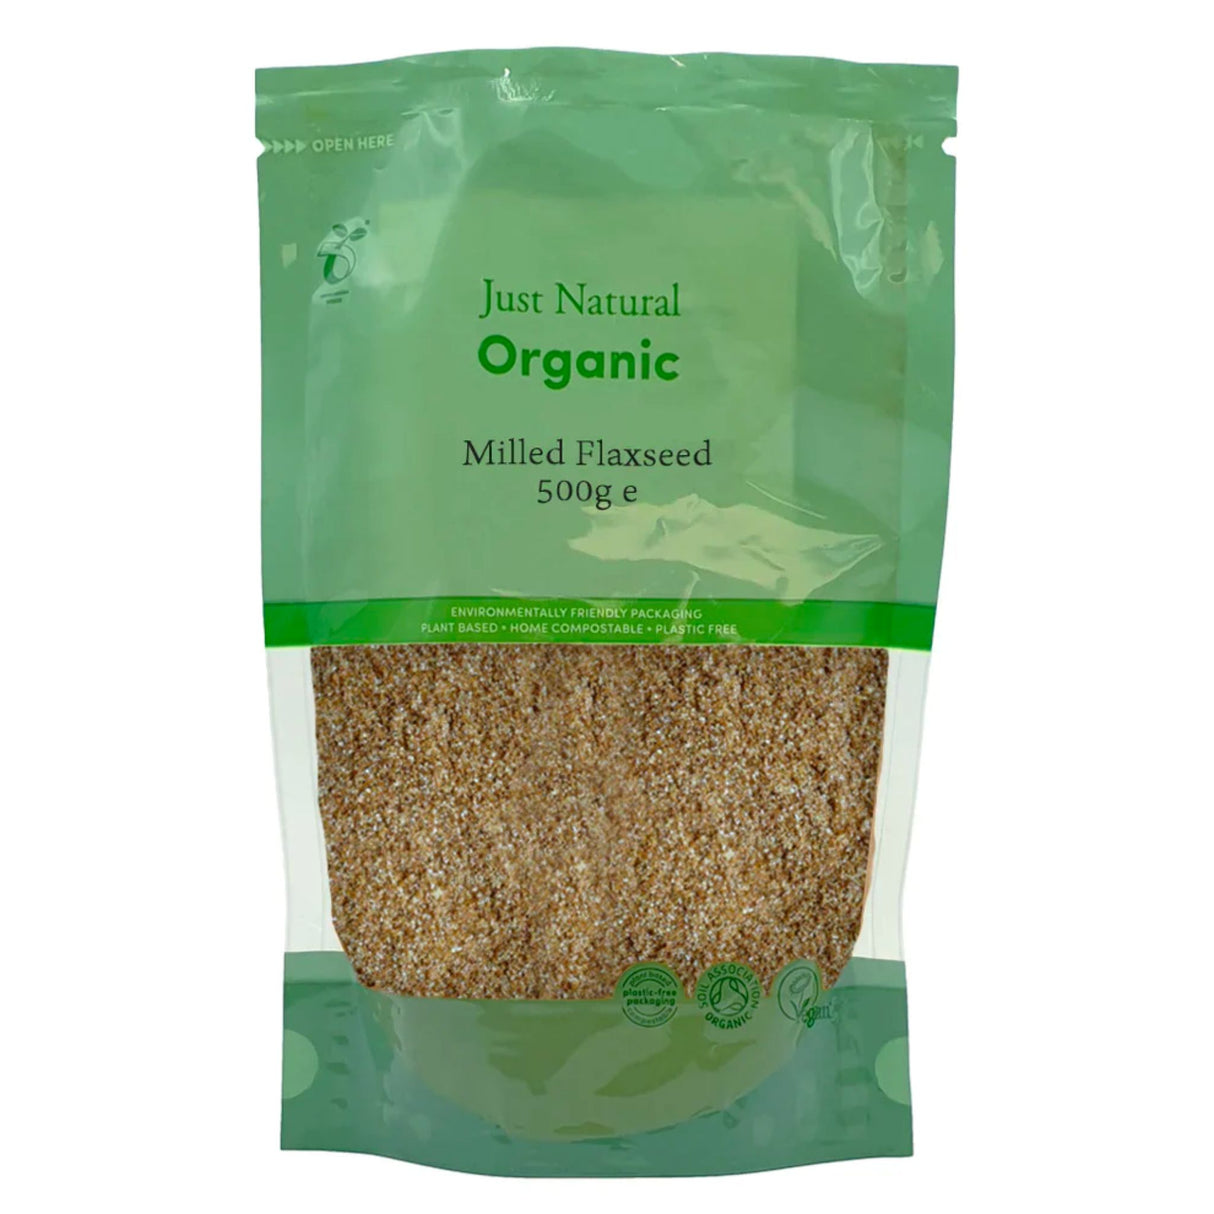 Just Natural Milled Flaxseed 500g